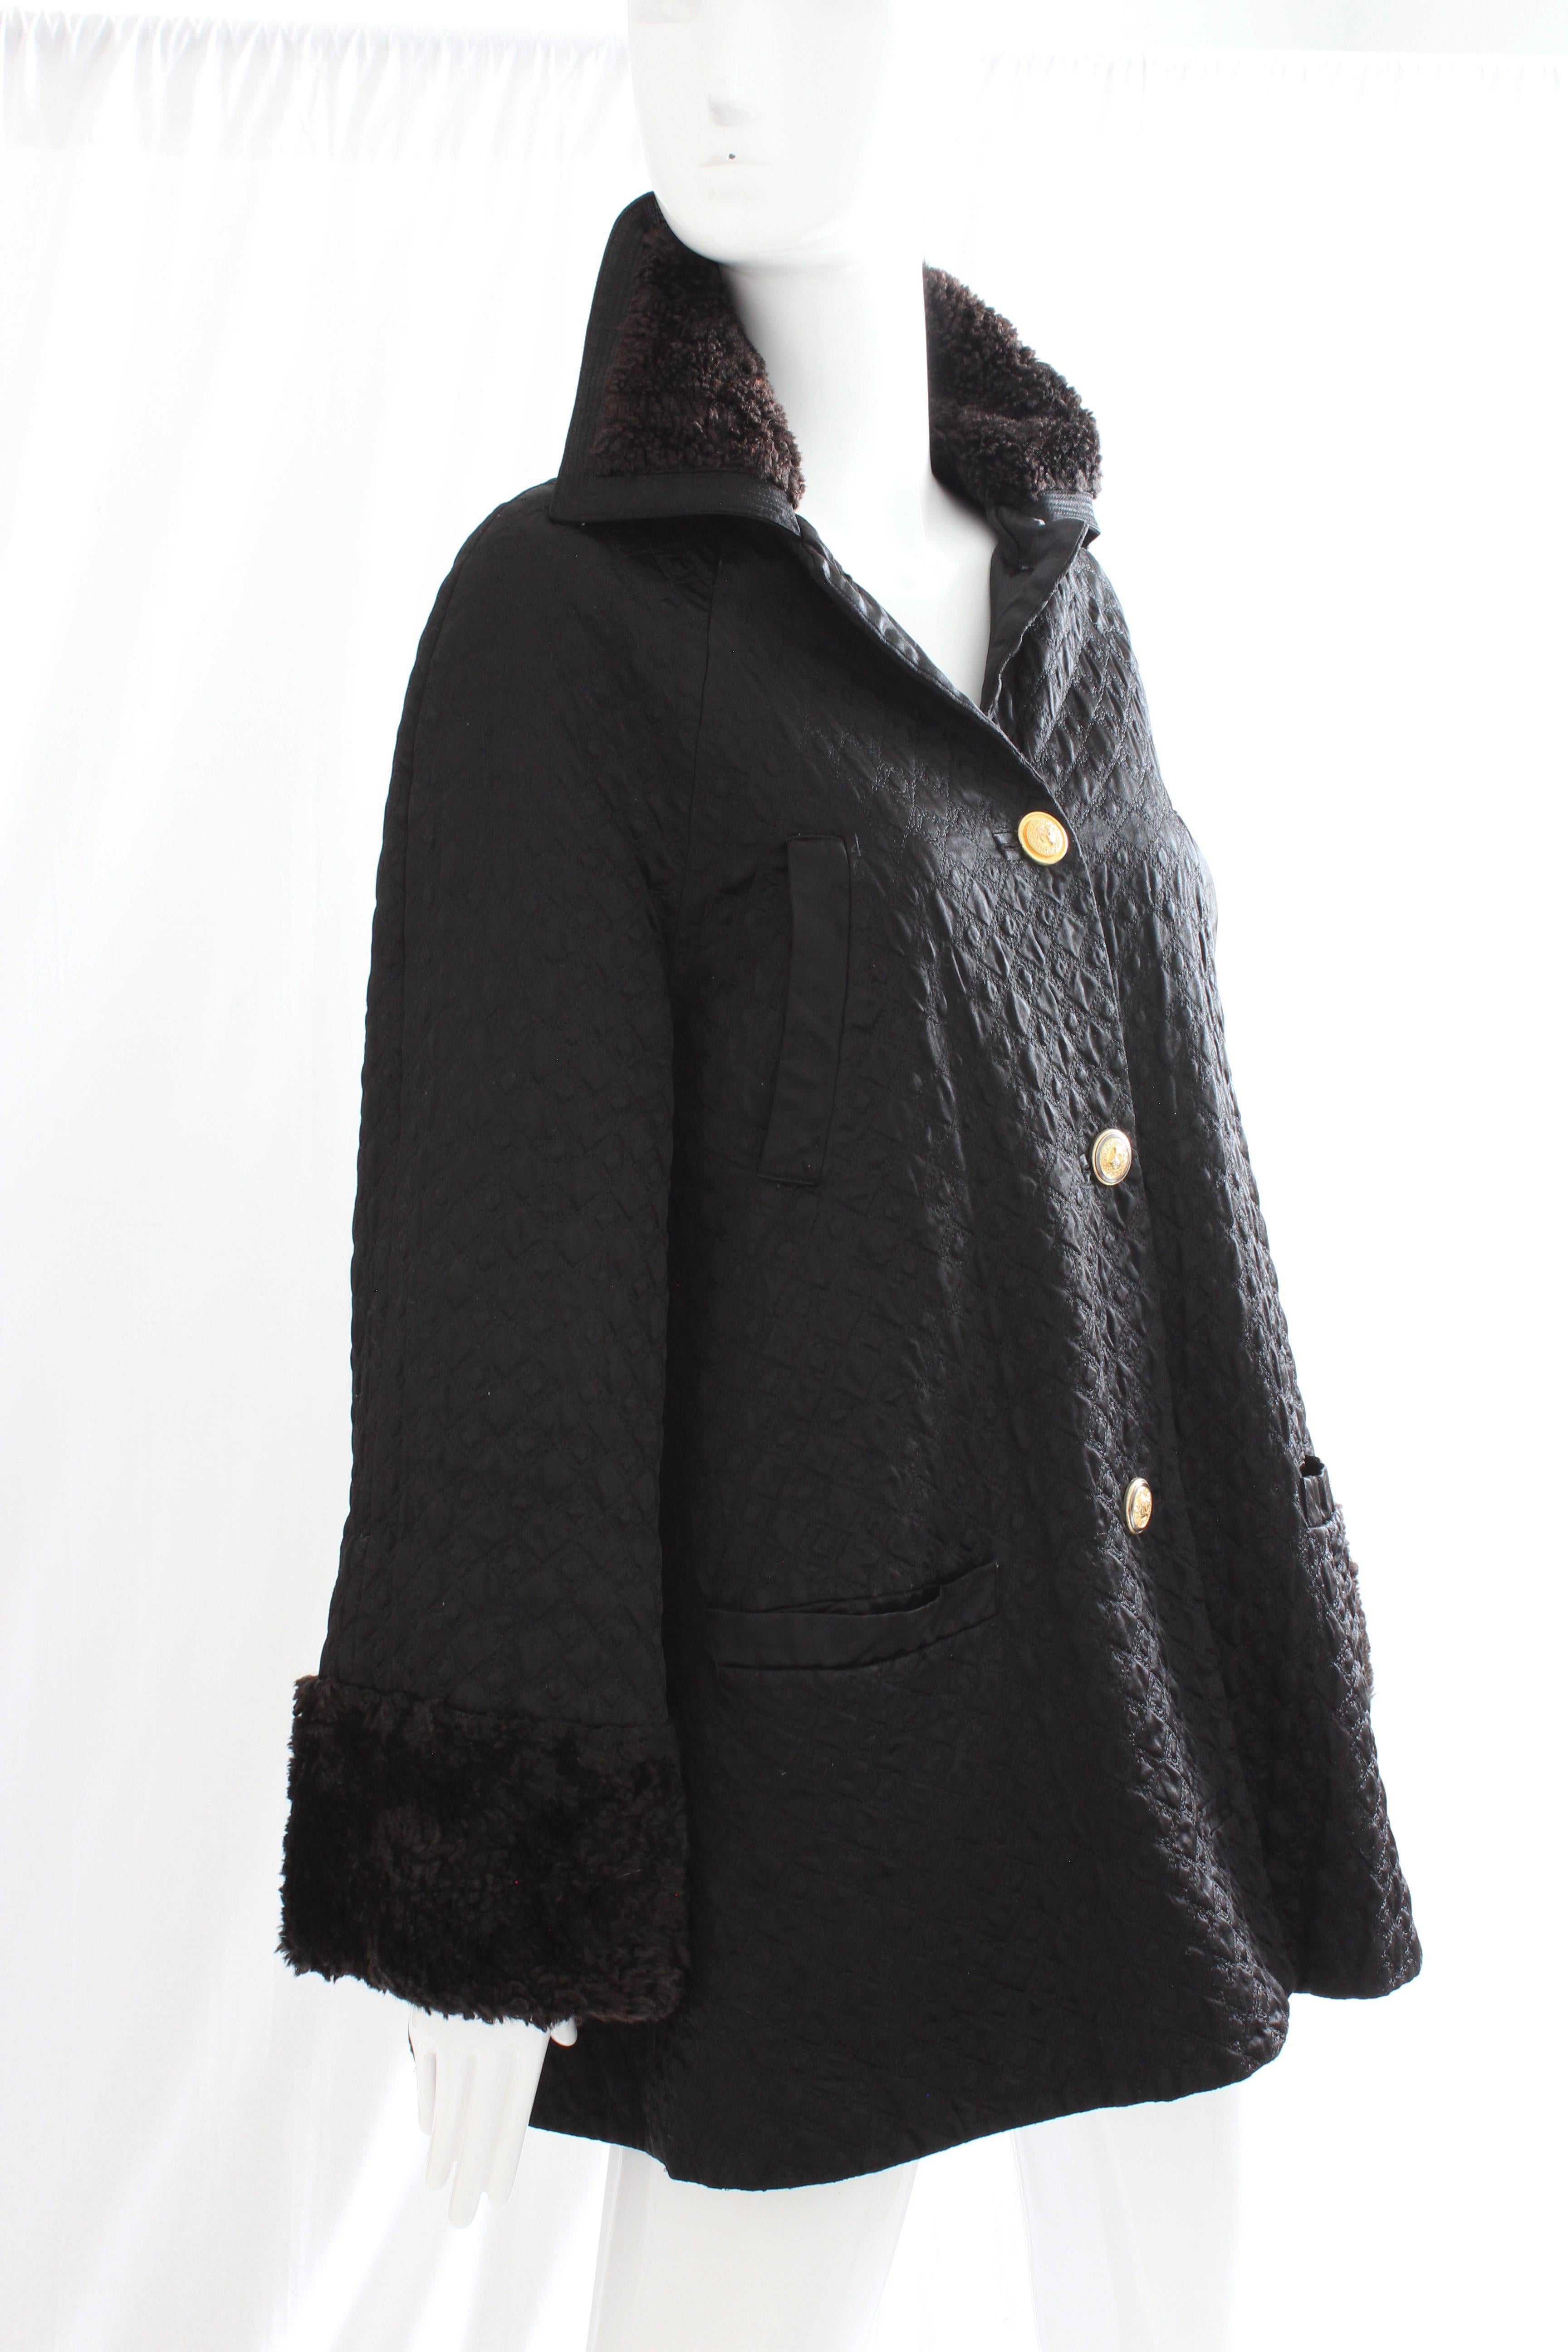 This black diamond-quilted satin jacket with fur trim was made by Gianni Versace for their Versus label, most likely in the 1990s.  No content label, but this piece appears to be made from a soft synthetic black satin and has deep brown faux fur